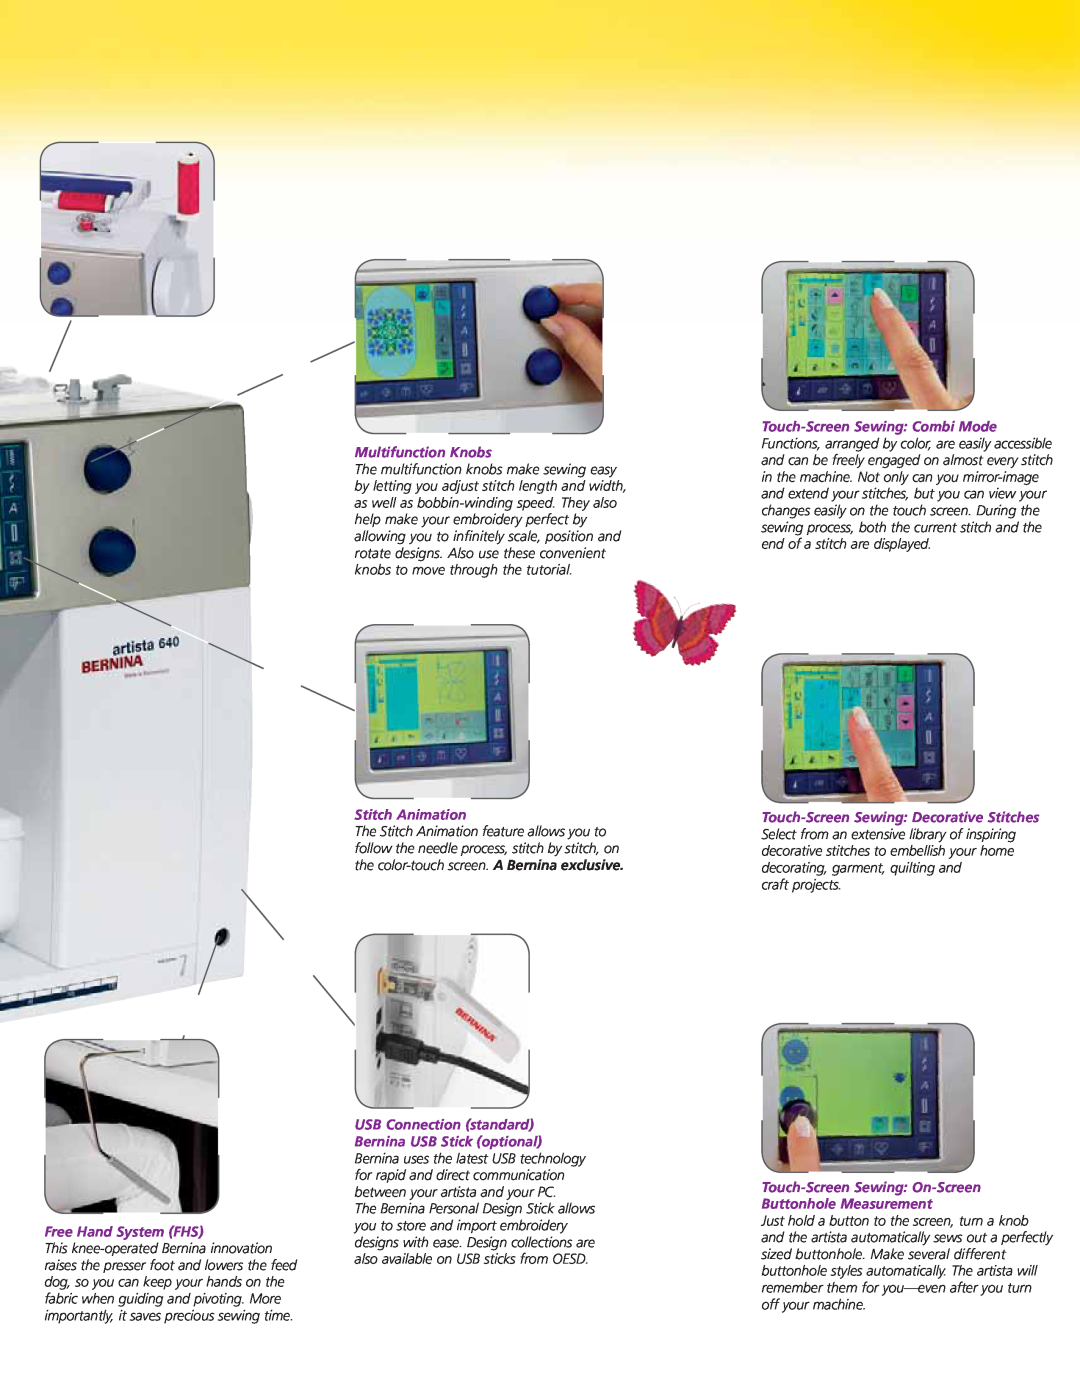 Bernina 640E, 630E Free Hand System FHS, Multifunction Knobs, Stitch Animation, USB Connection standard, craft projects 